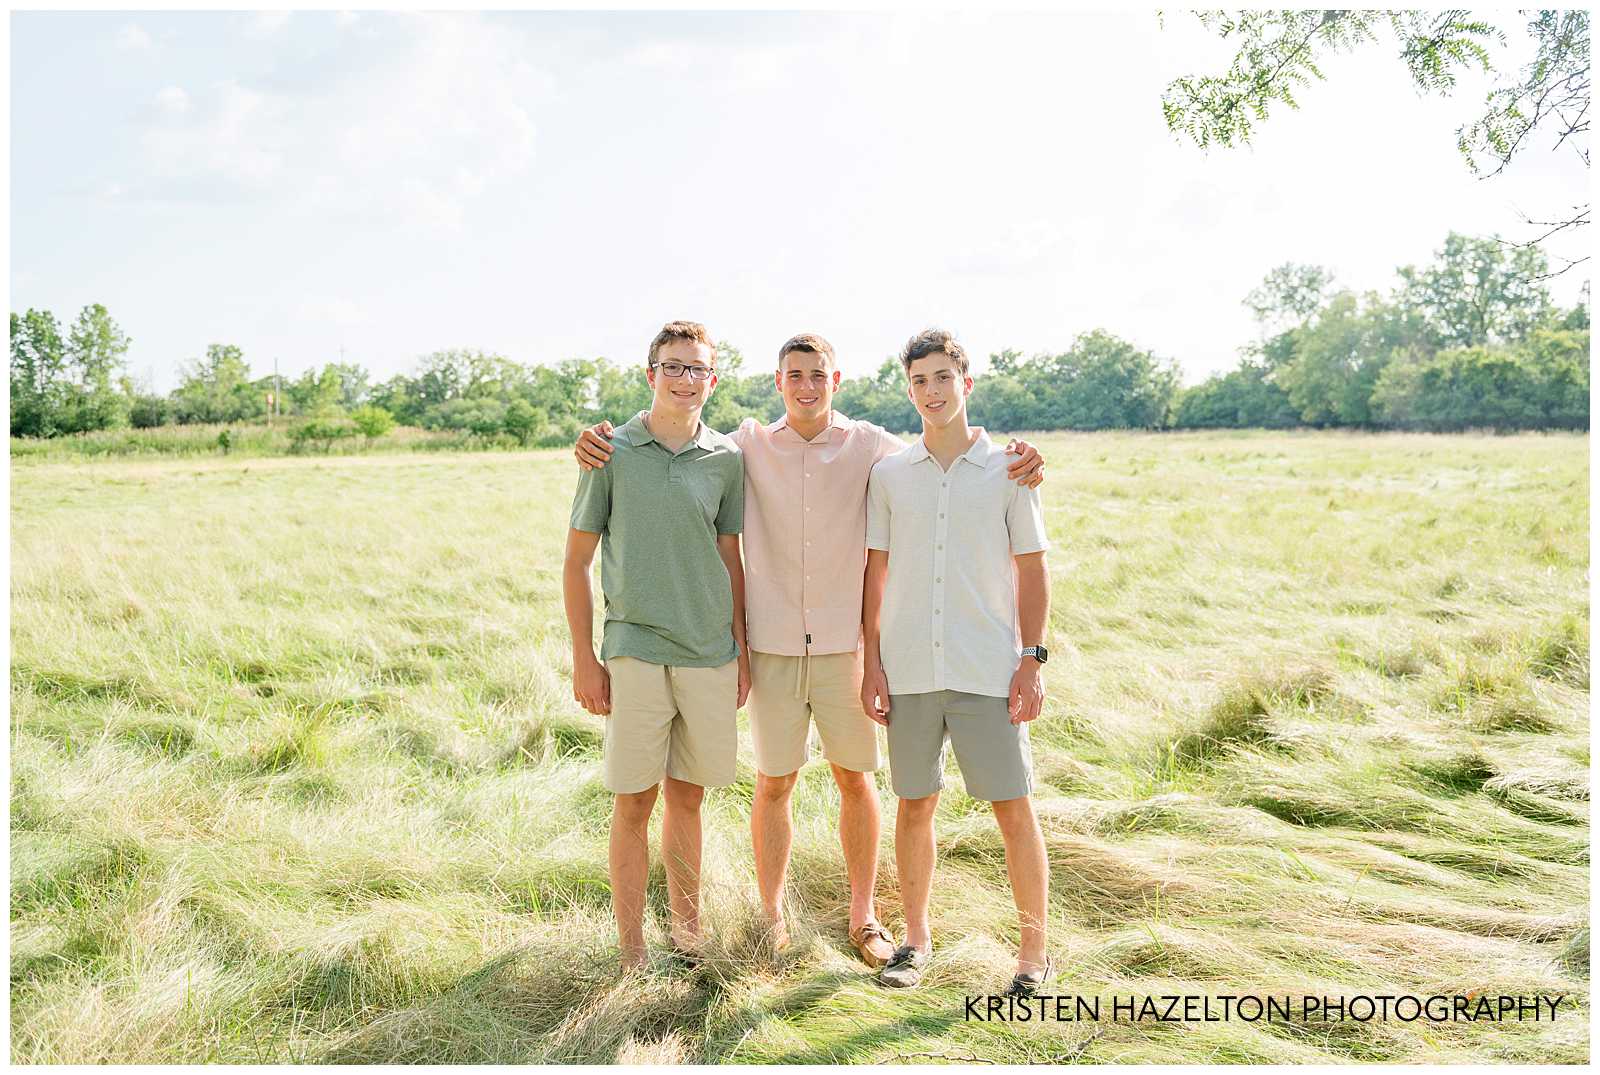 Three teenage brothers standing together in a field